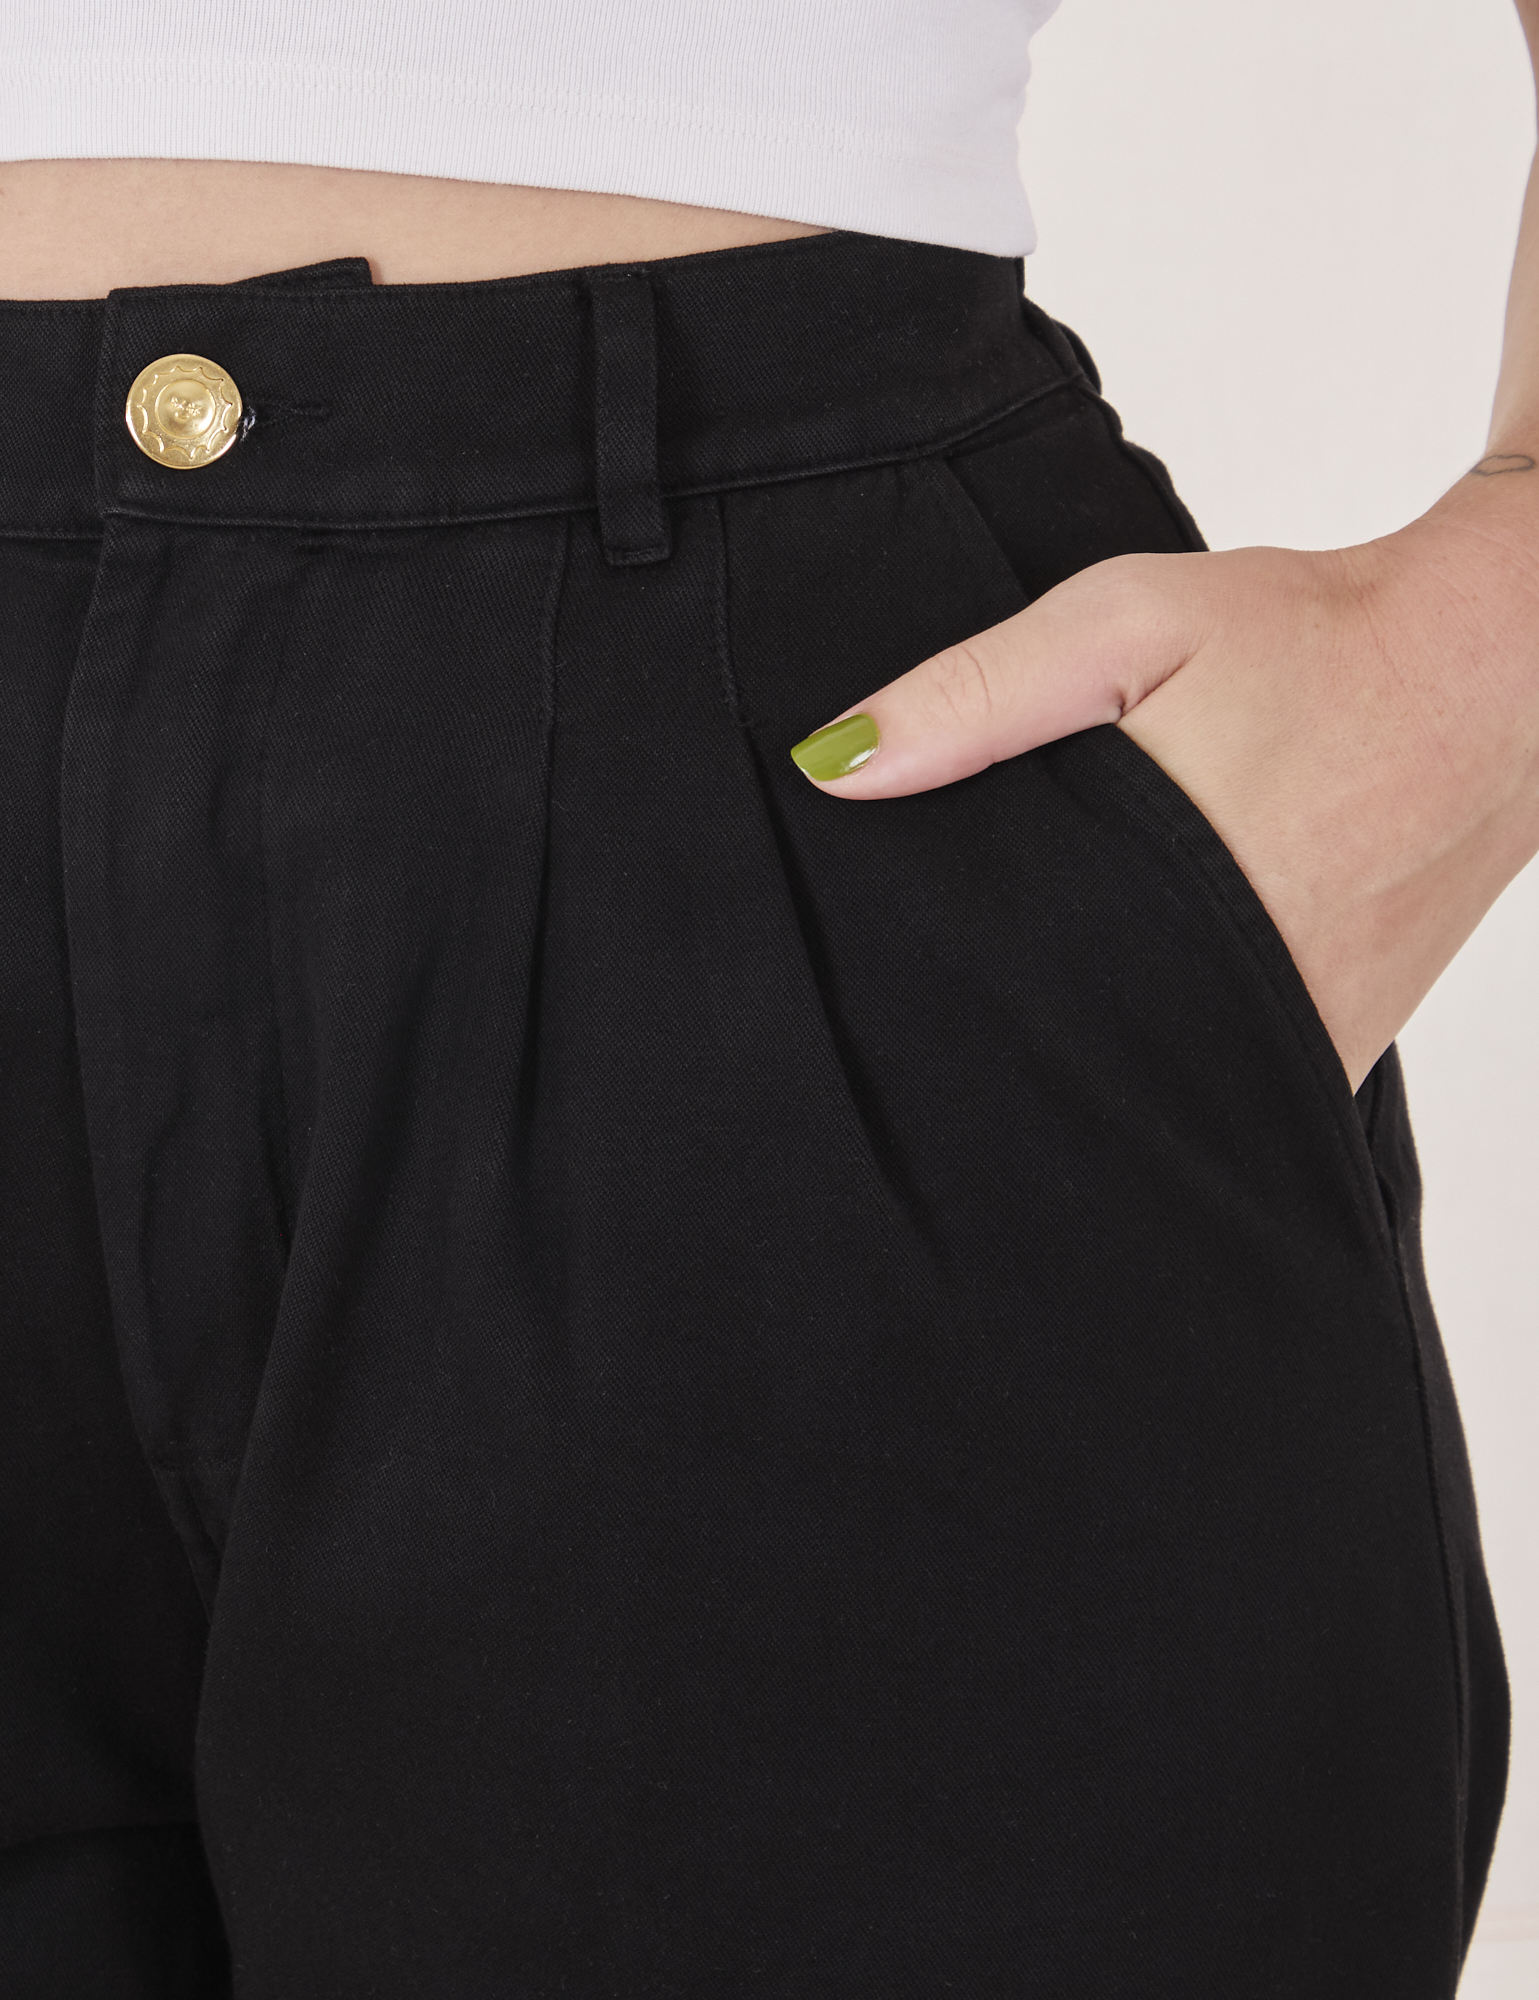 Front close up of Organic Trousers in Basic Black. Alex has her hand in the pocket.